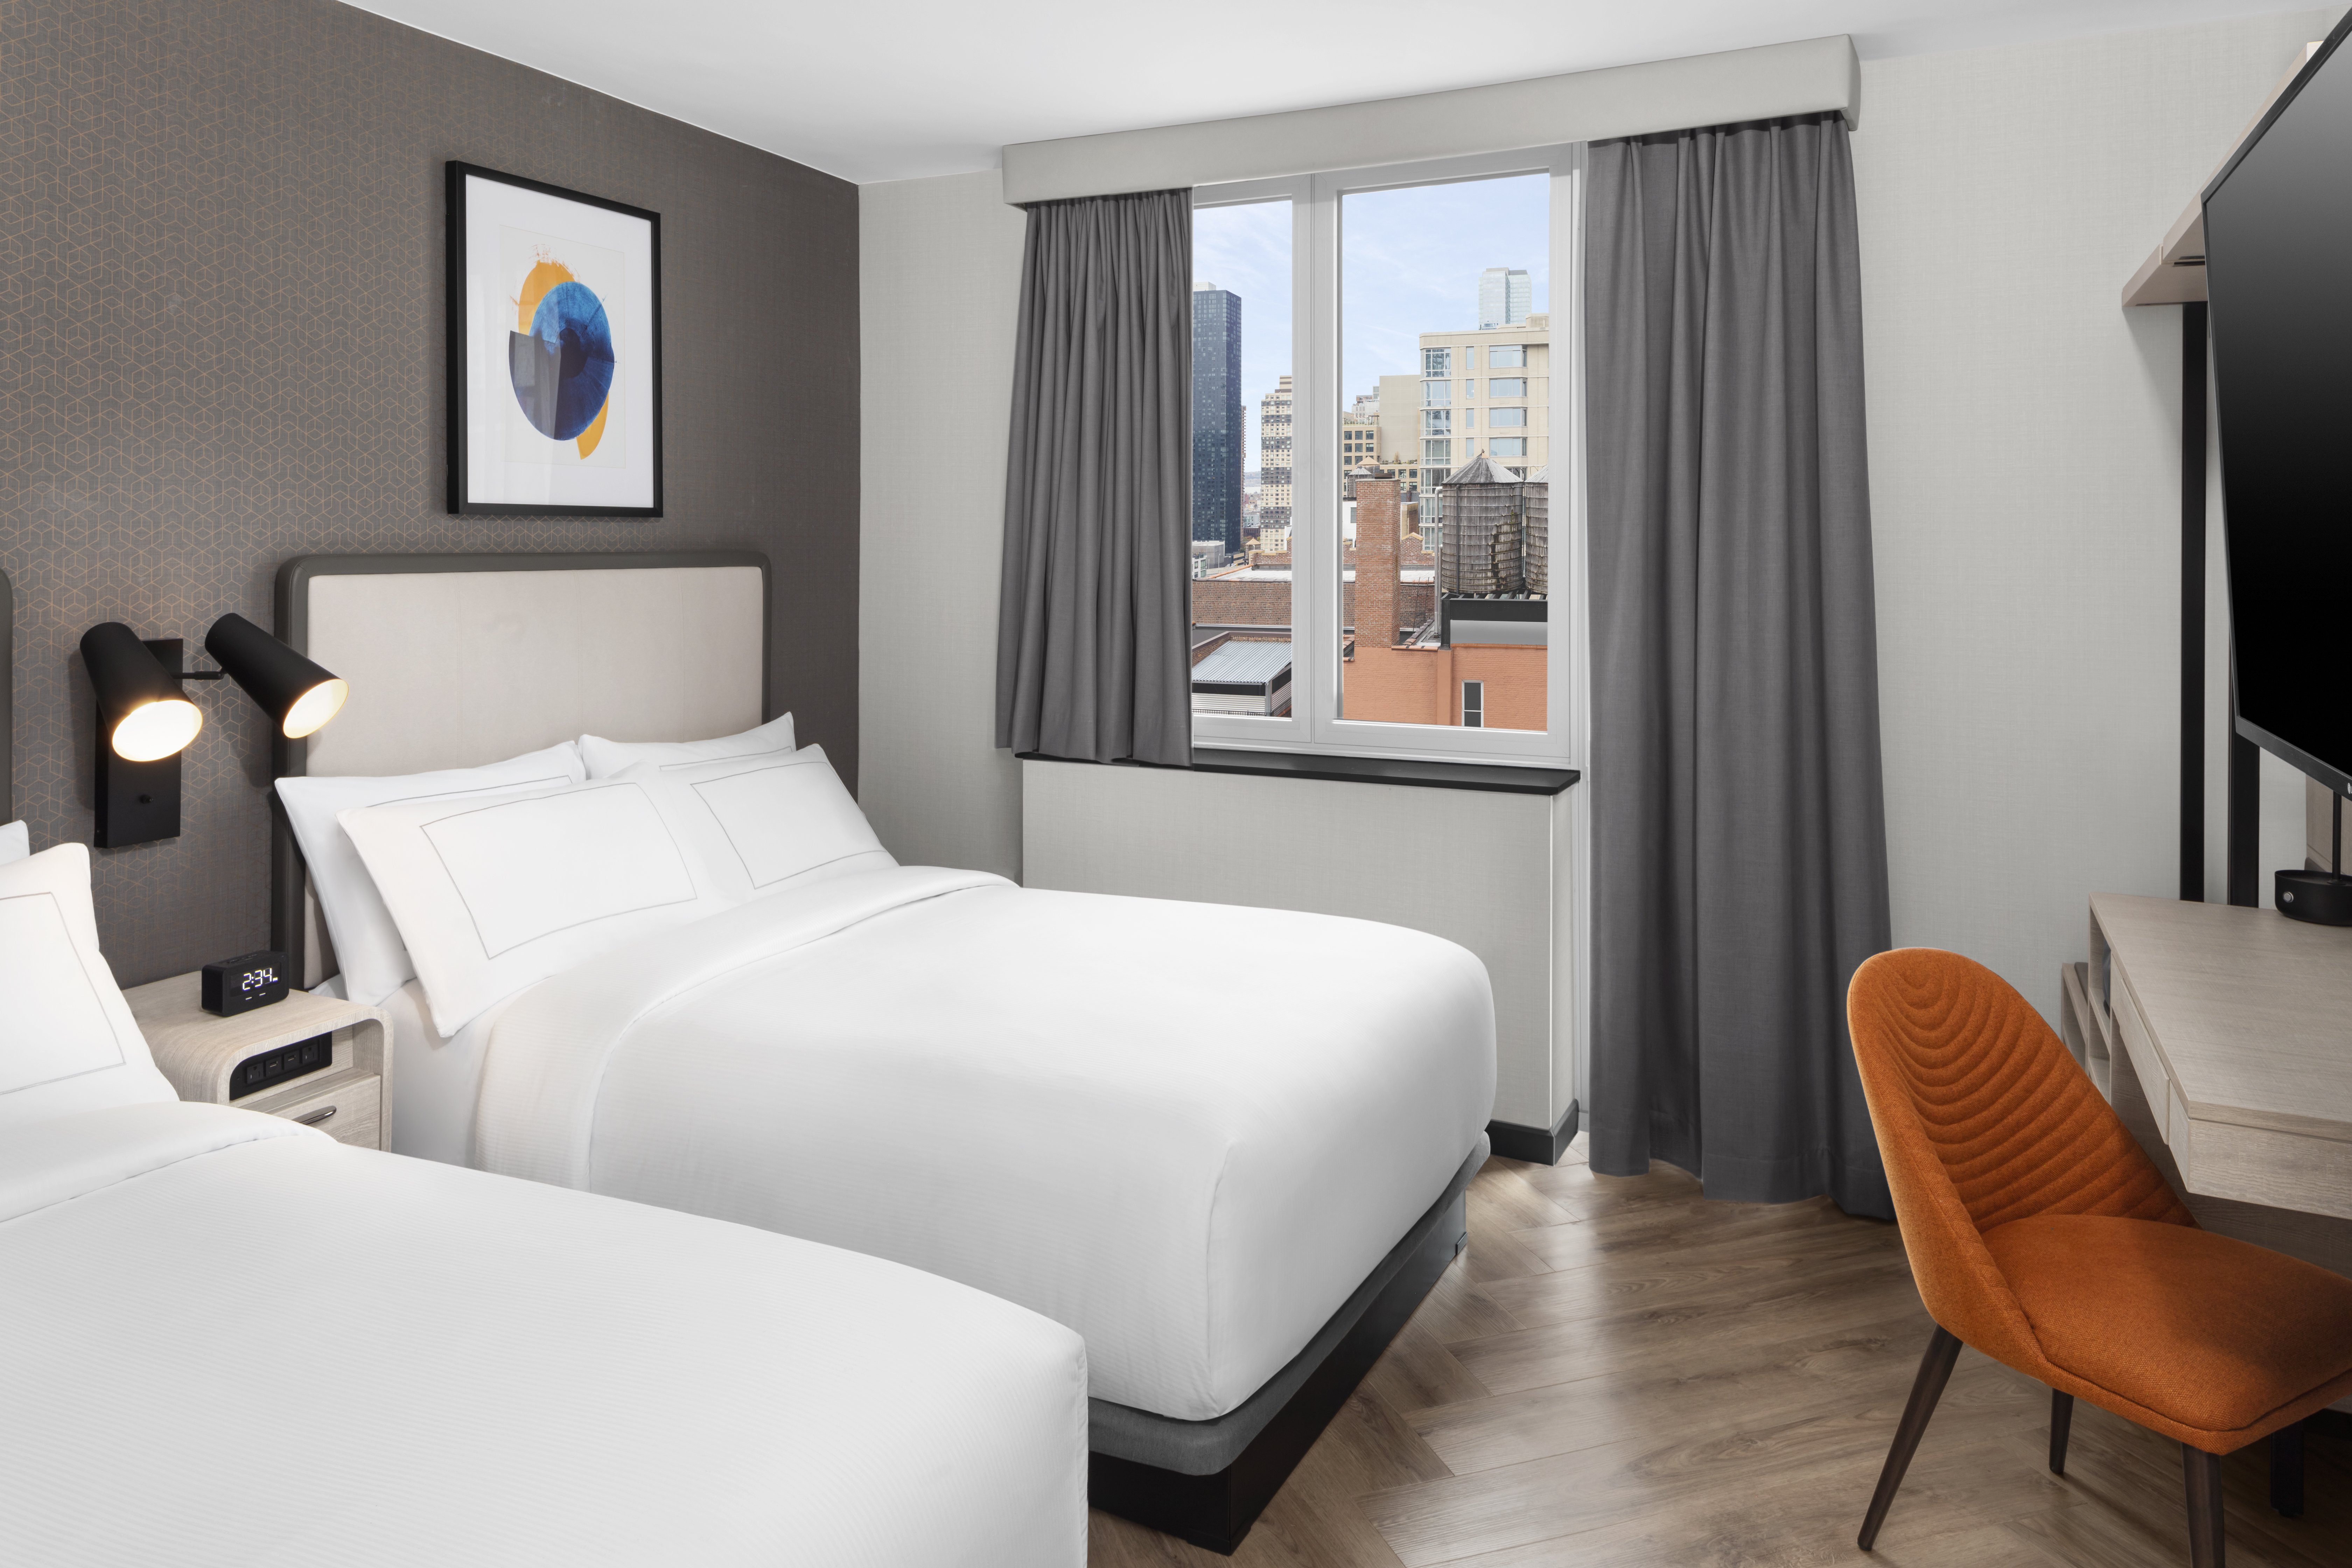 Book a Double Bed guest room with a view of New York City.